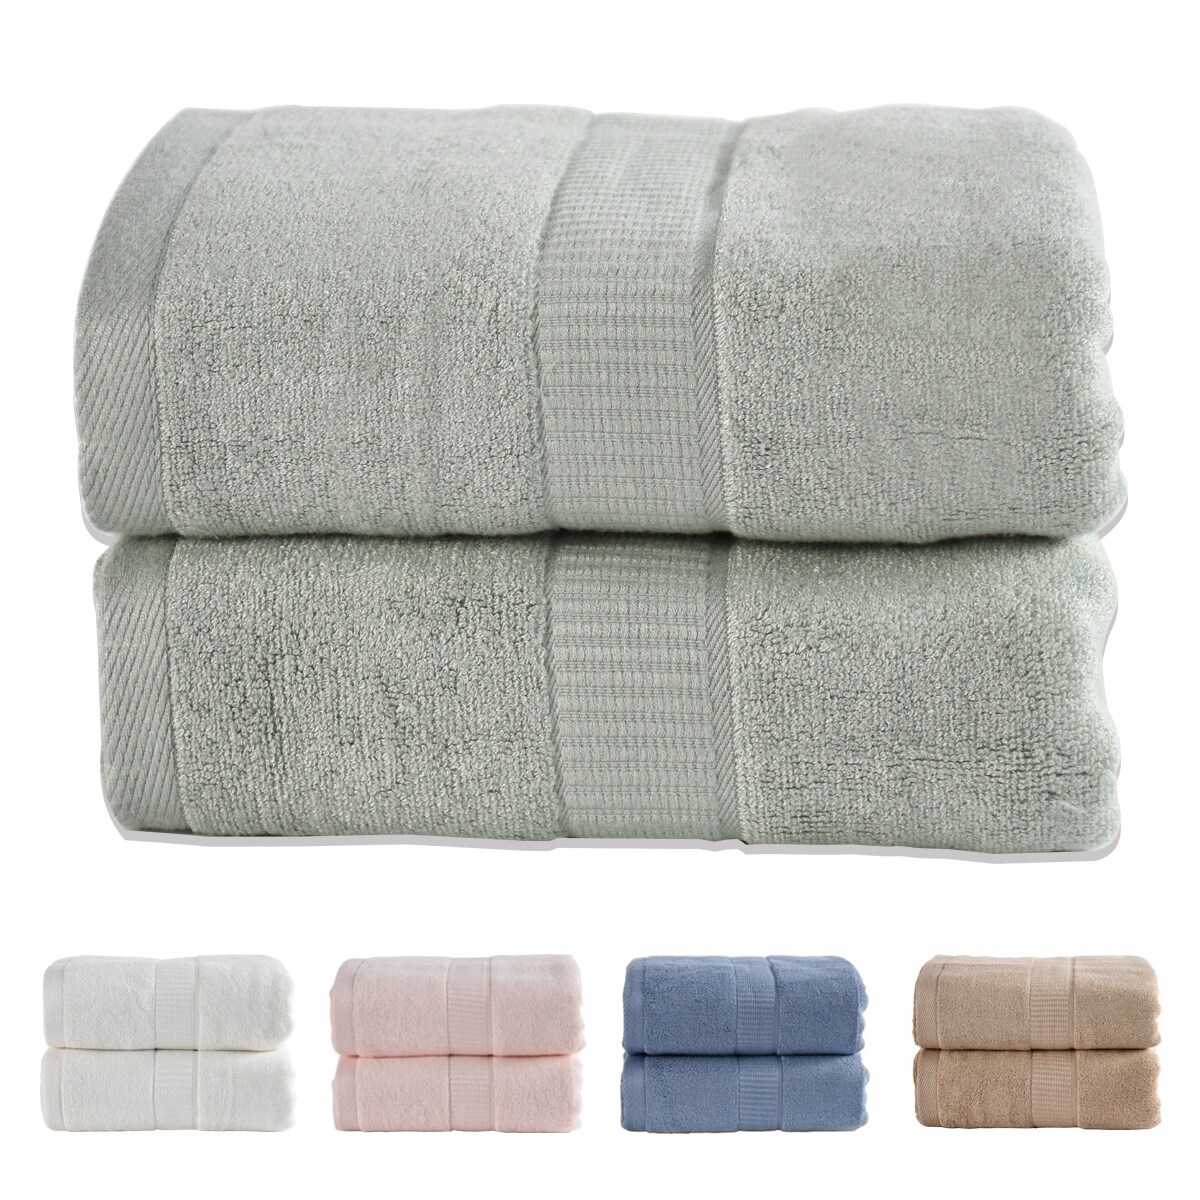 https://ak1.ostkcdn.com/images/products/is/images/direct/0dd9d2a109187e74d9a7ab3da3927568e6a8782f/2-Pack-Premium-Bamboo-Cotton-Bath-Towels-With-Gift-Box.jpg